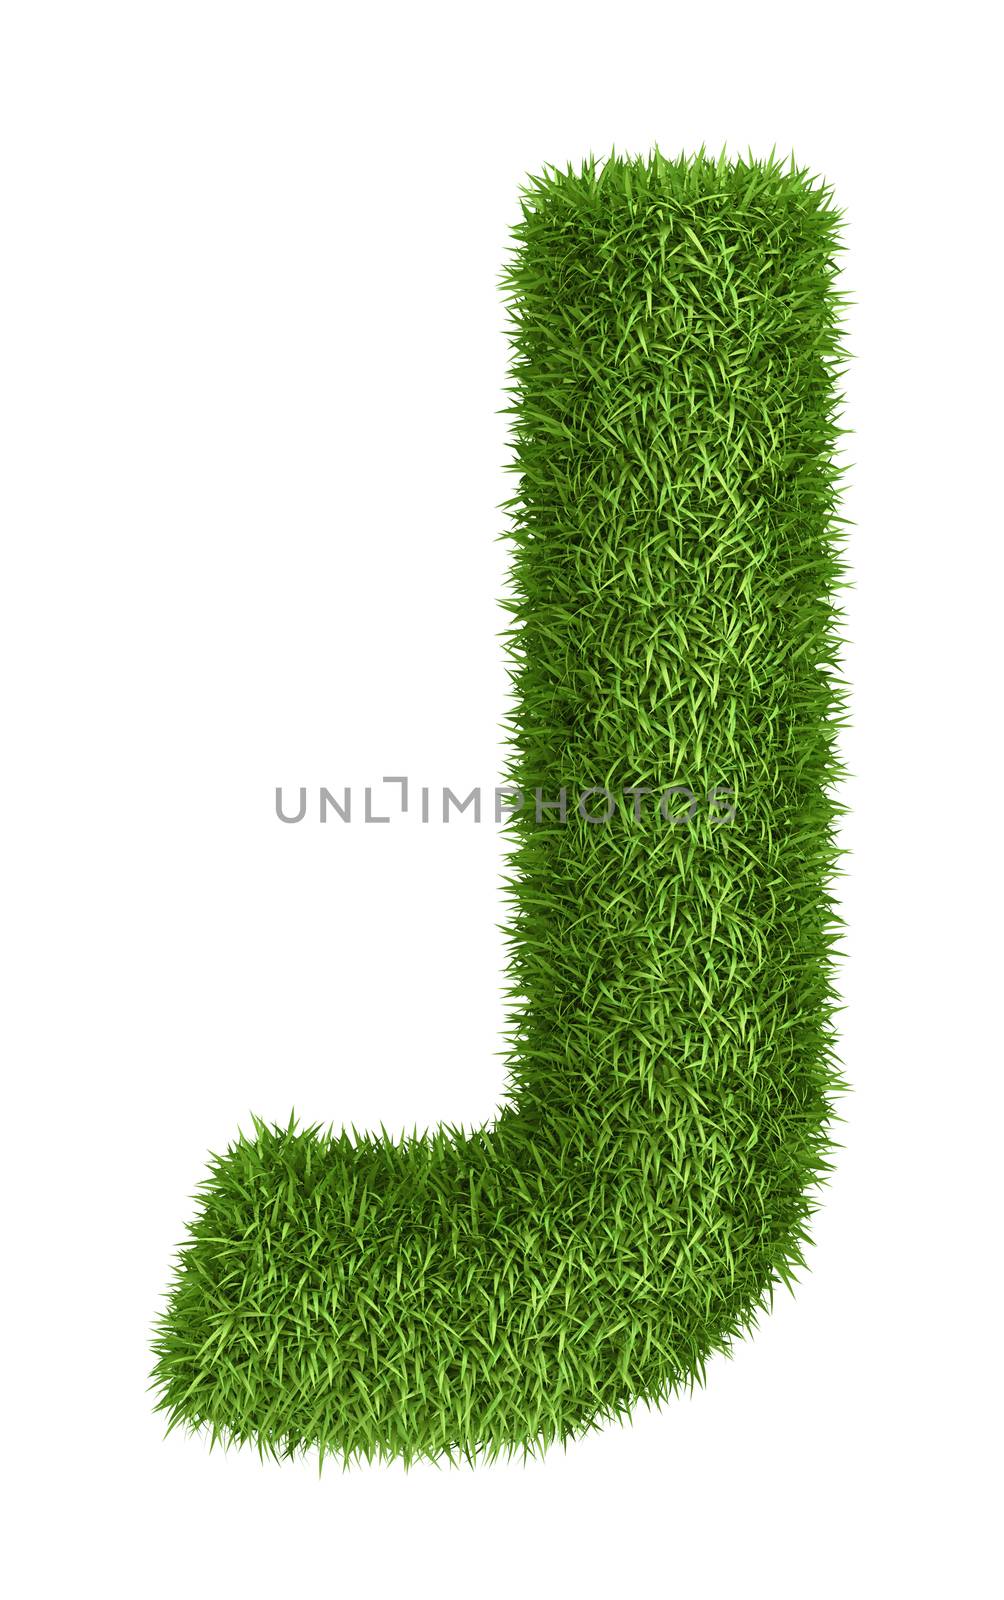 Natural grass letter J by iunewind